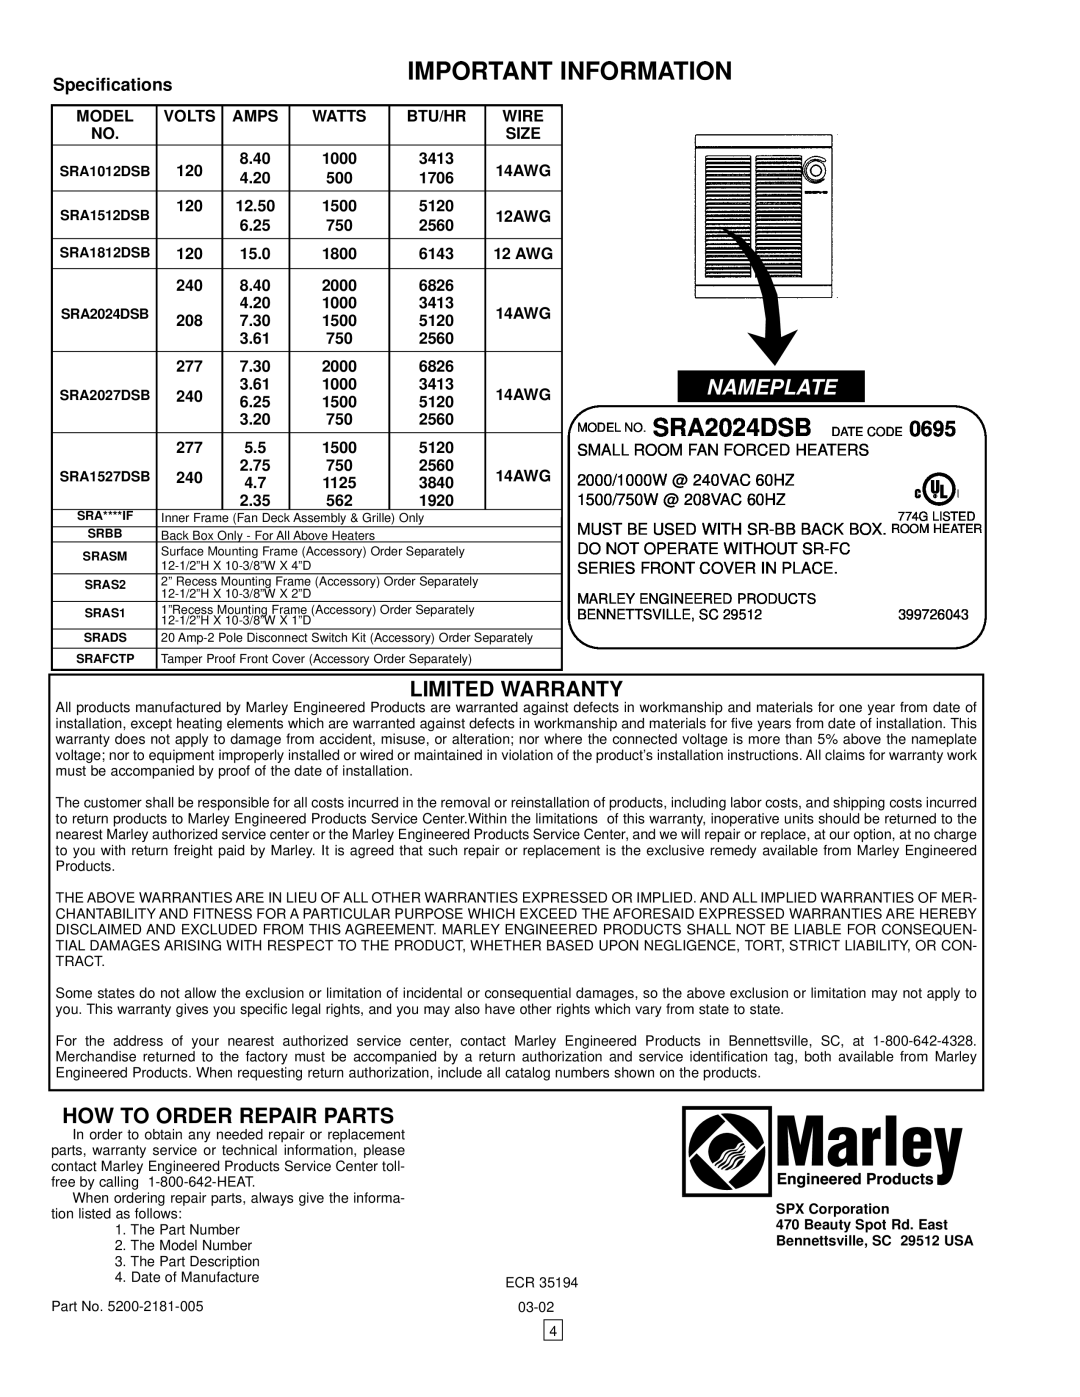 Marley Engineered Products SRA-DS SERIES MODEL B Model, Volts, Amps, Watts, Btu/Hr, Wire, Size, 8.40, 14AWG, 4.20, 12AWG 